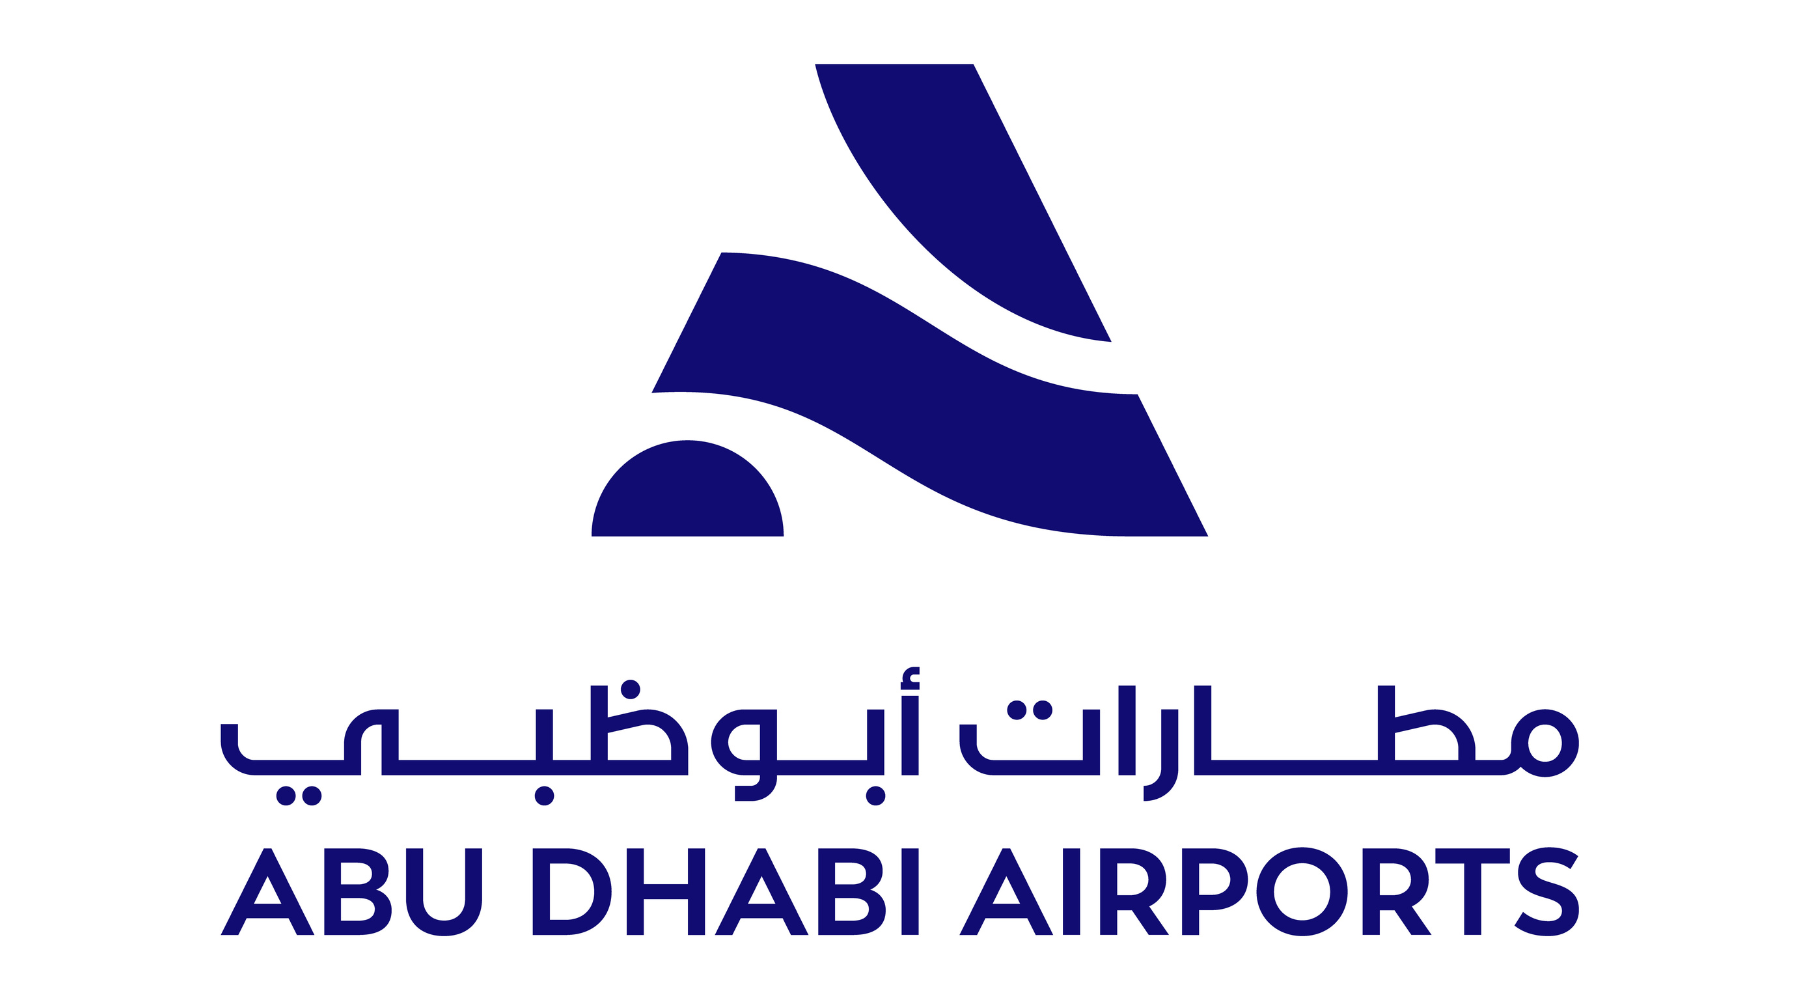 Abu Dhabi Airports Appoints Memac Ogilvy as New Lead Creative Agency